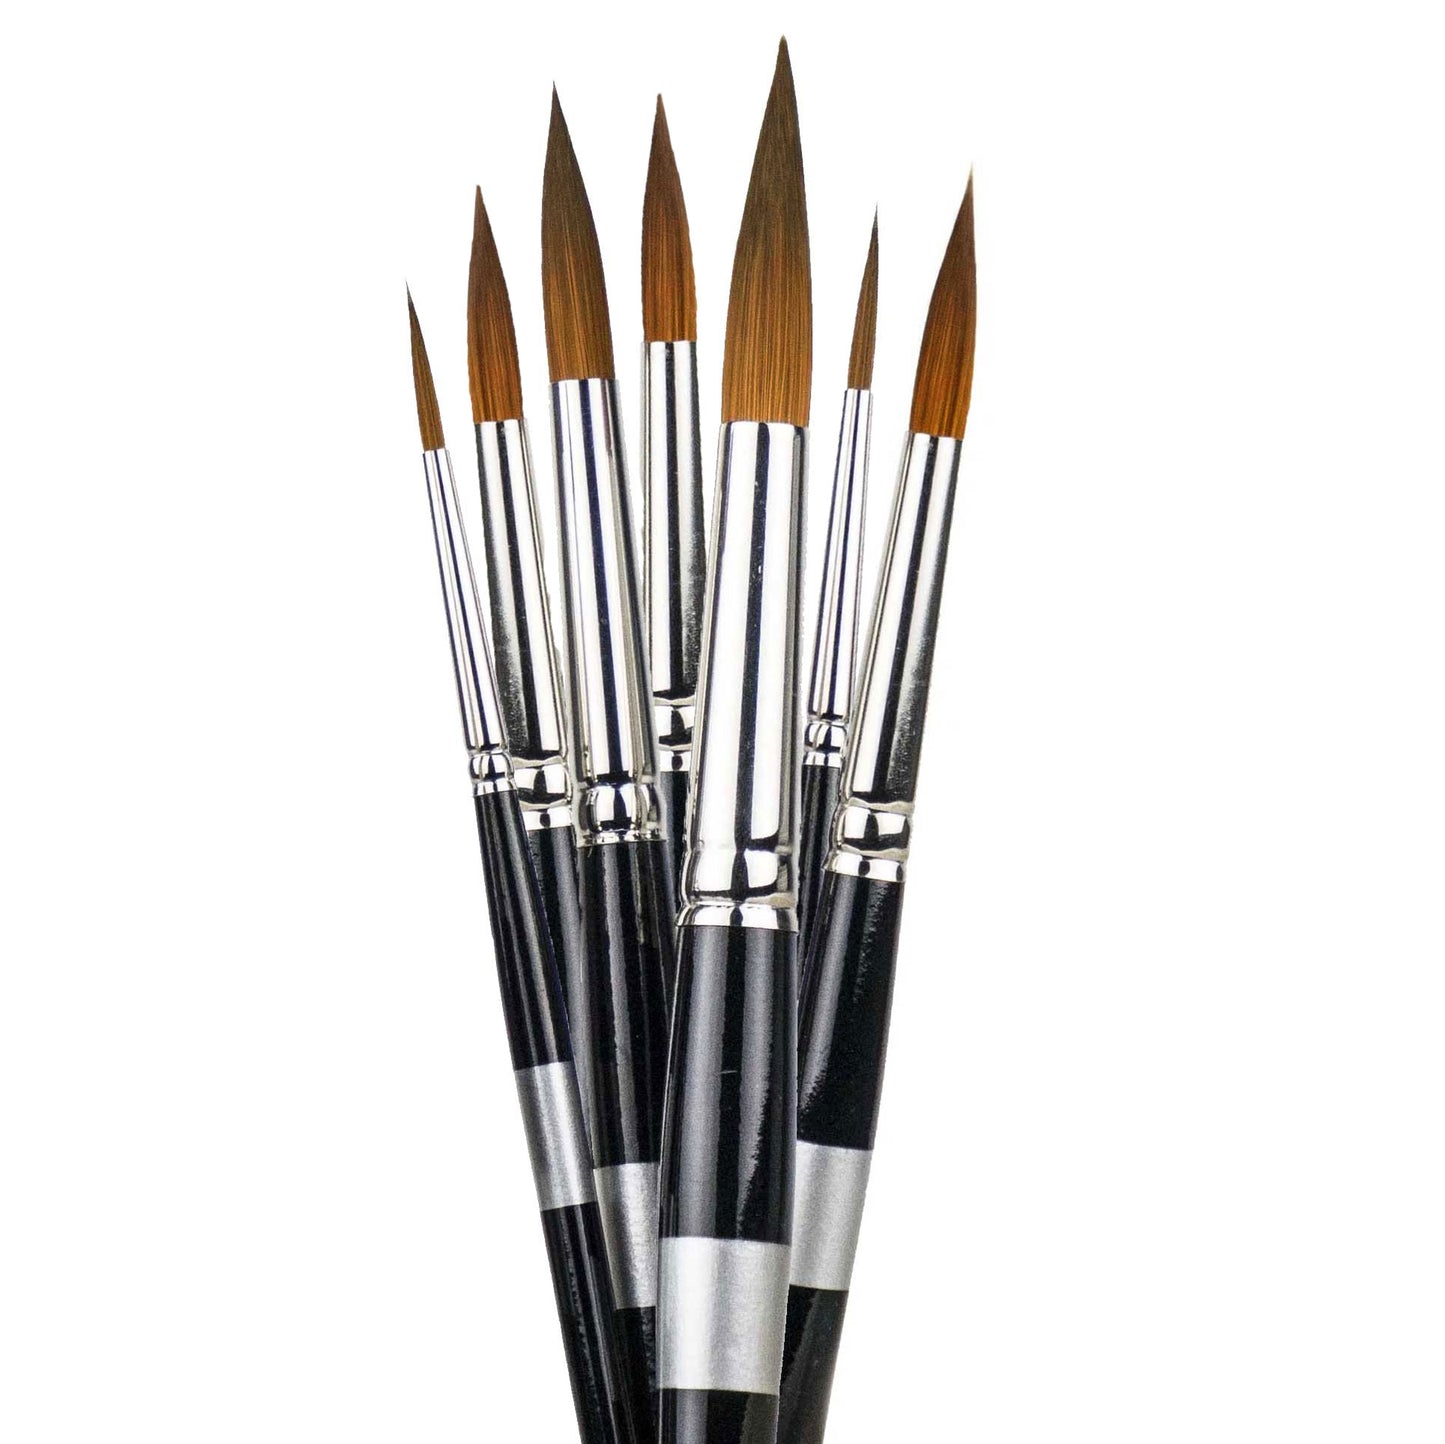 Protégé Plus - Synthetic Kolinsky Artist Brushes For All Media - 6" Short Handle synthetic vegan friendly for oil, acrylic, watercolor, gouache, ink and enamel paint Trekell Art Supplies